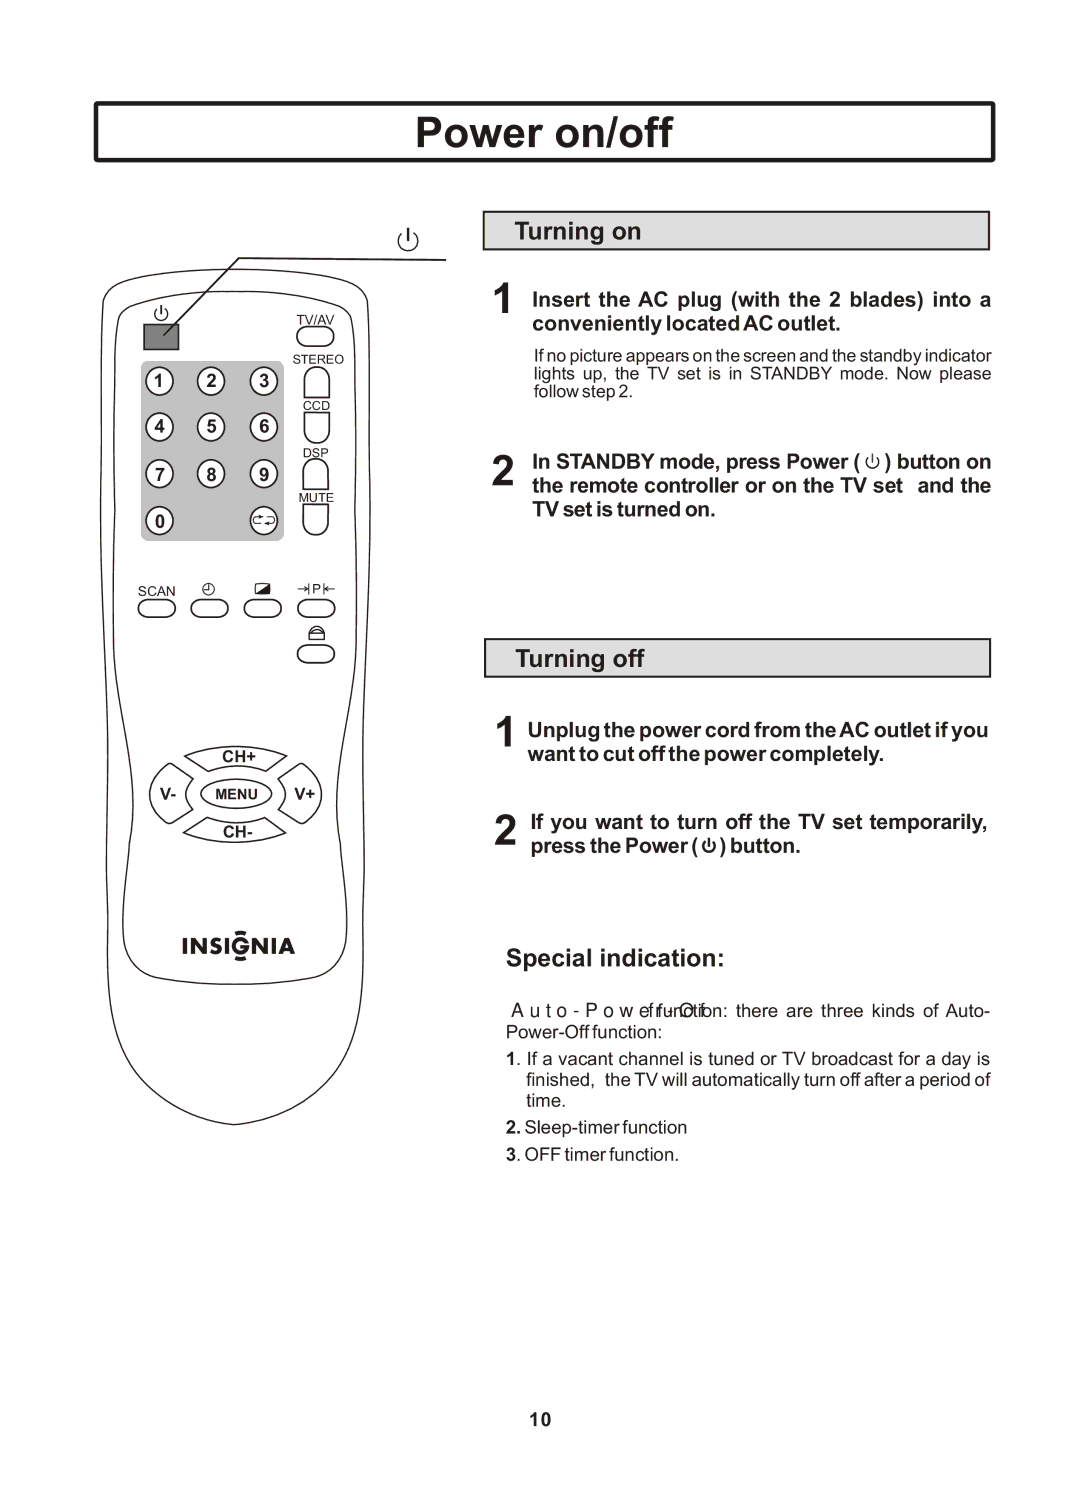 Insignia IS-TV040922 user manual Power on/off, Turning on, Turning off, Special indication 